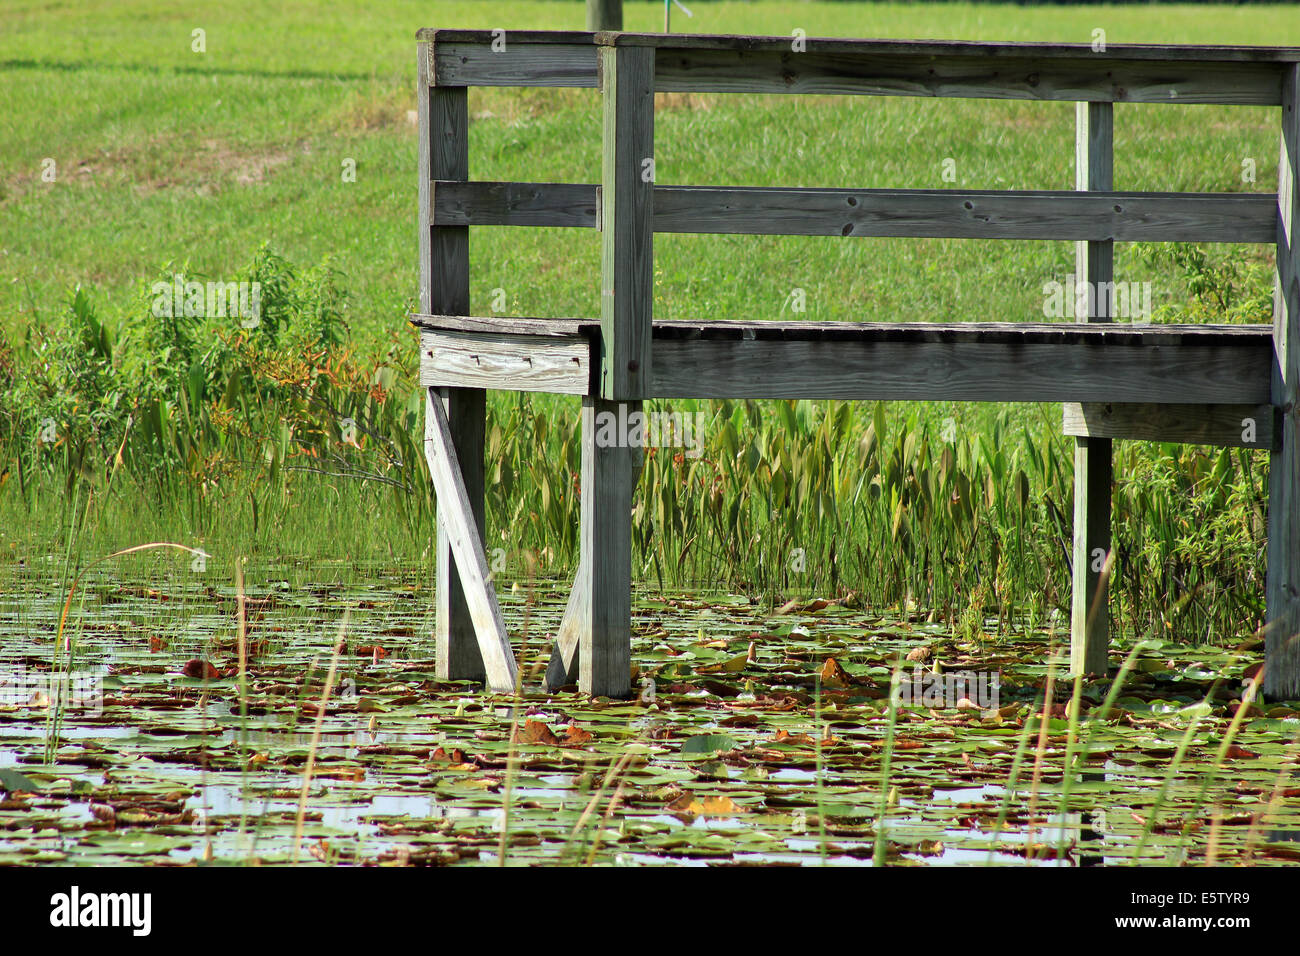 A wooden dock on a lake covered in water lilies in Orlando, Florida, USA Stock Photo